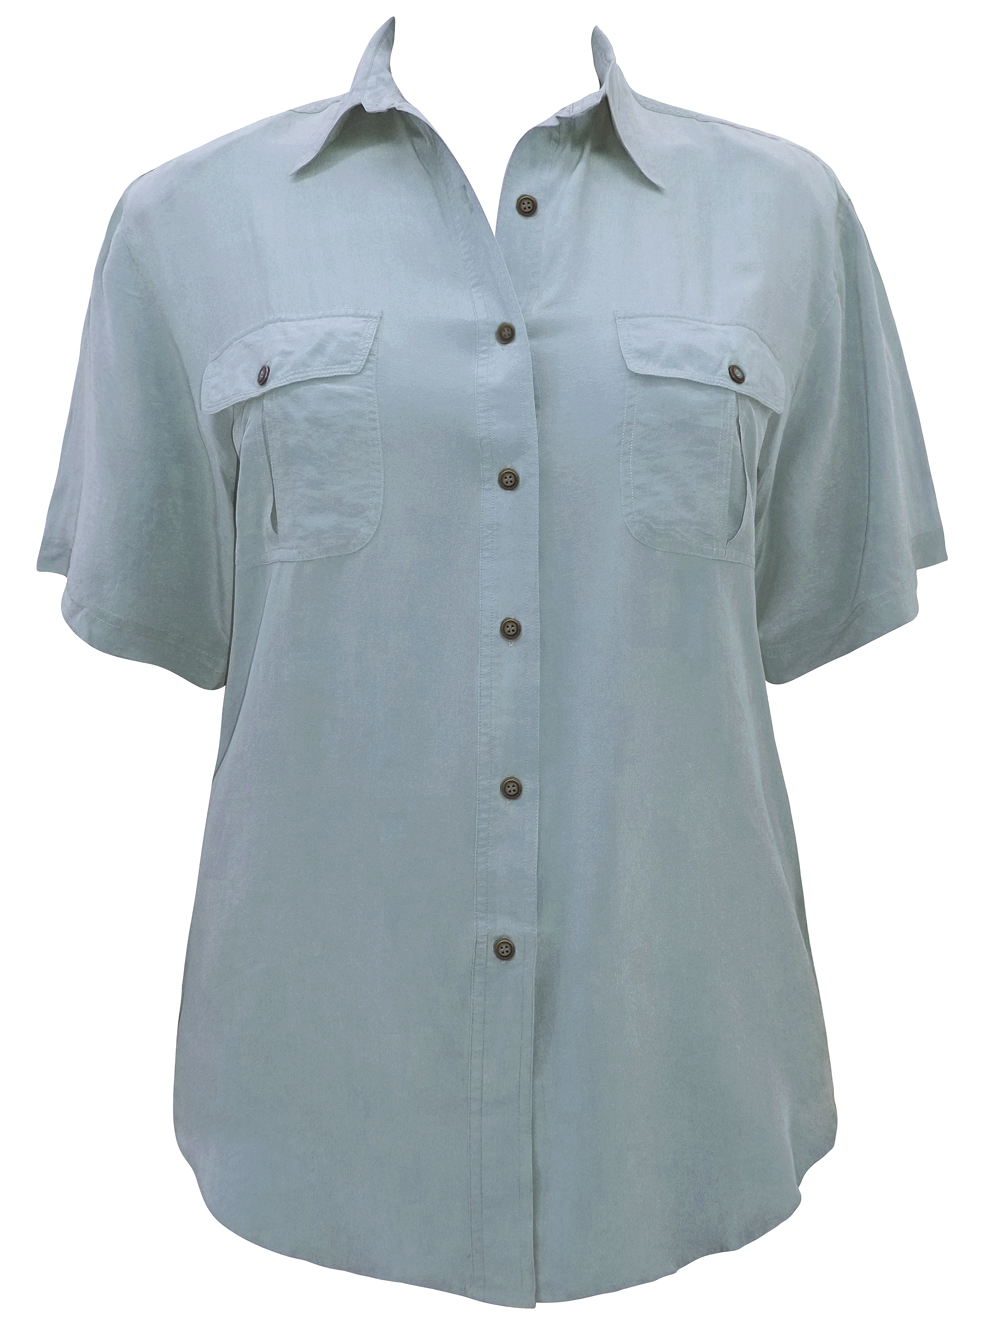 All Silk PETROL Pure Silk Short Sleeve Shirt with Pockets - UK Size 12/14 to 16/18 (S/M to L/XL)